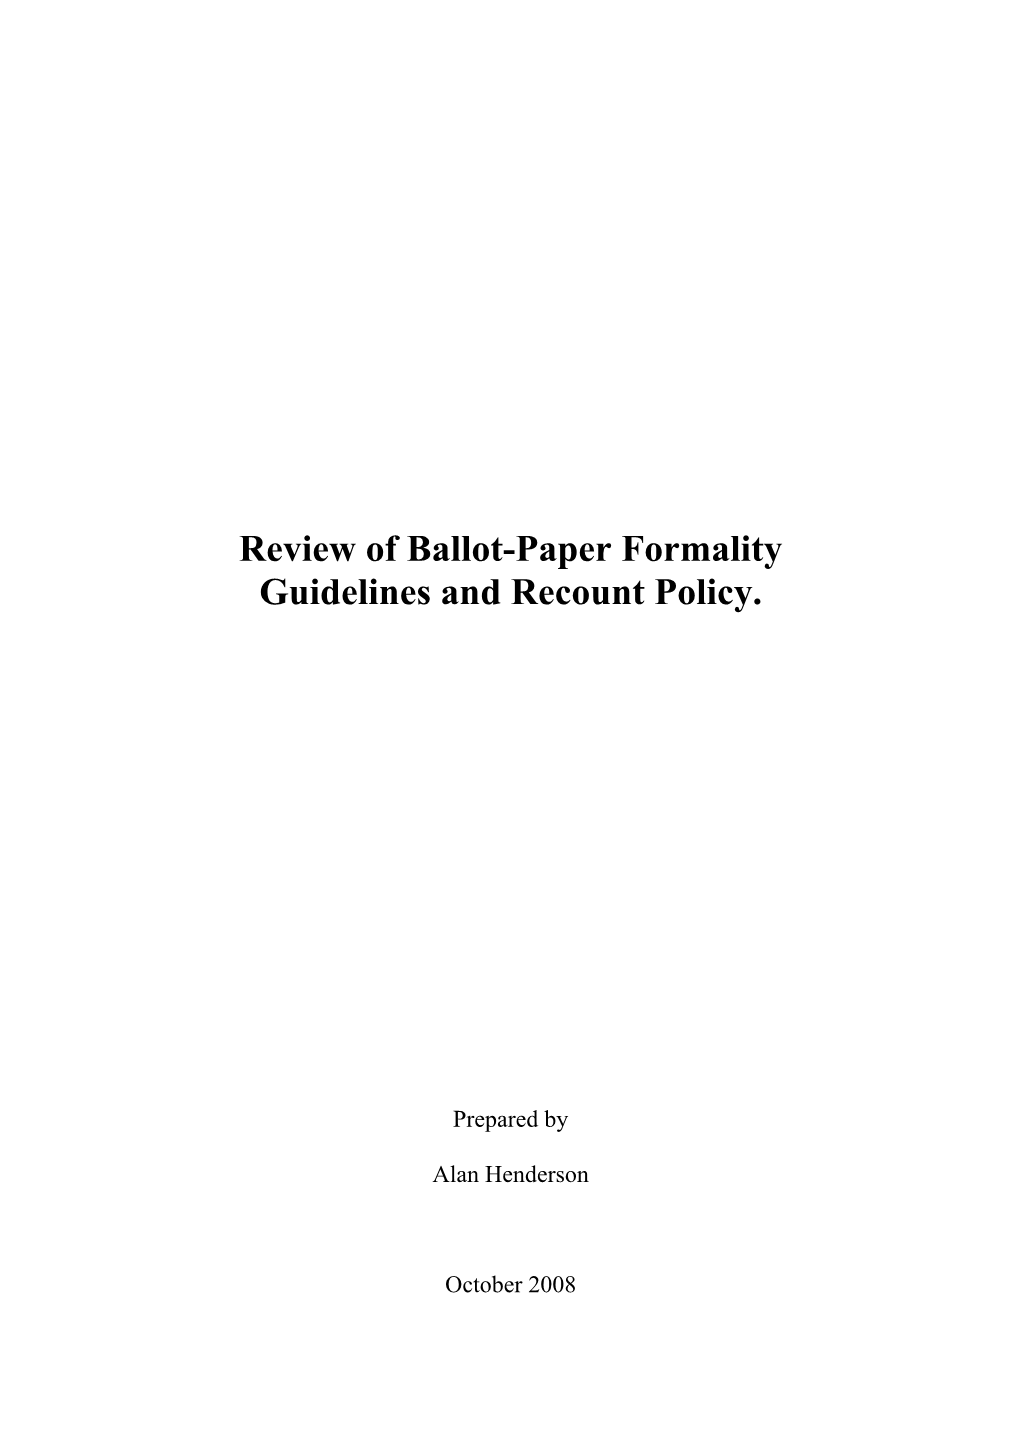 Review of Ballot-Paper Formality Guidelines and Recount Policy